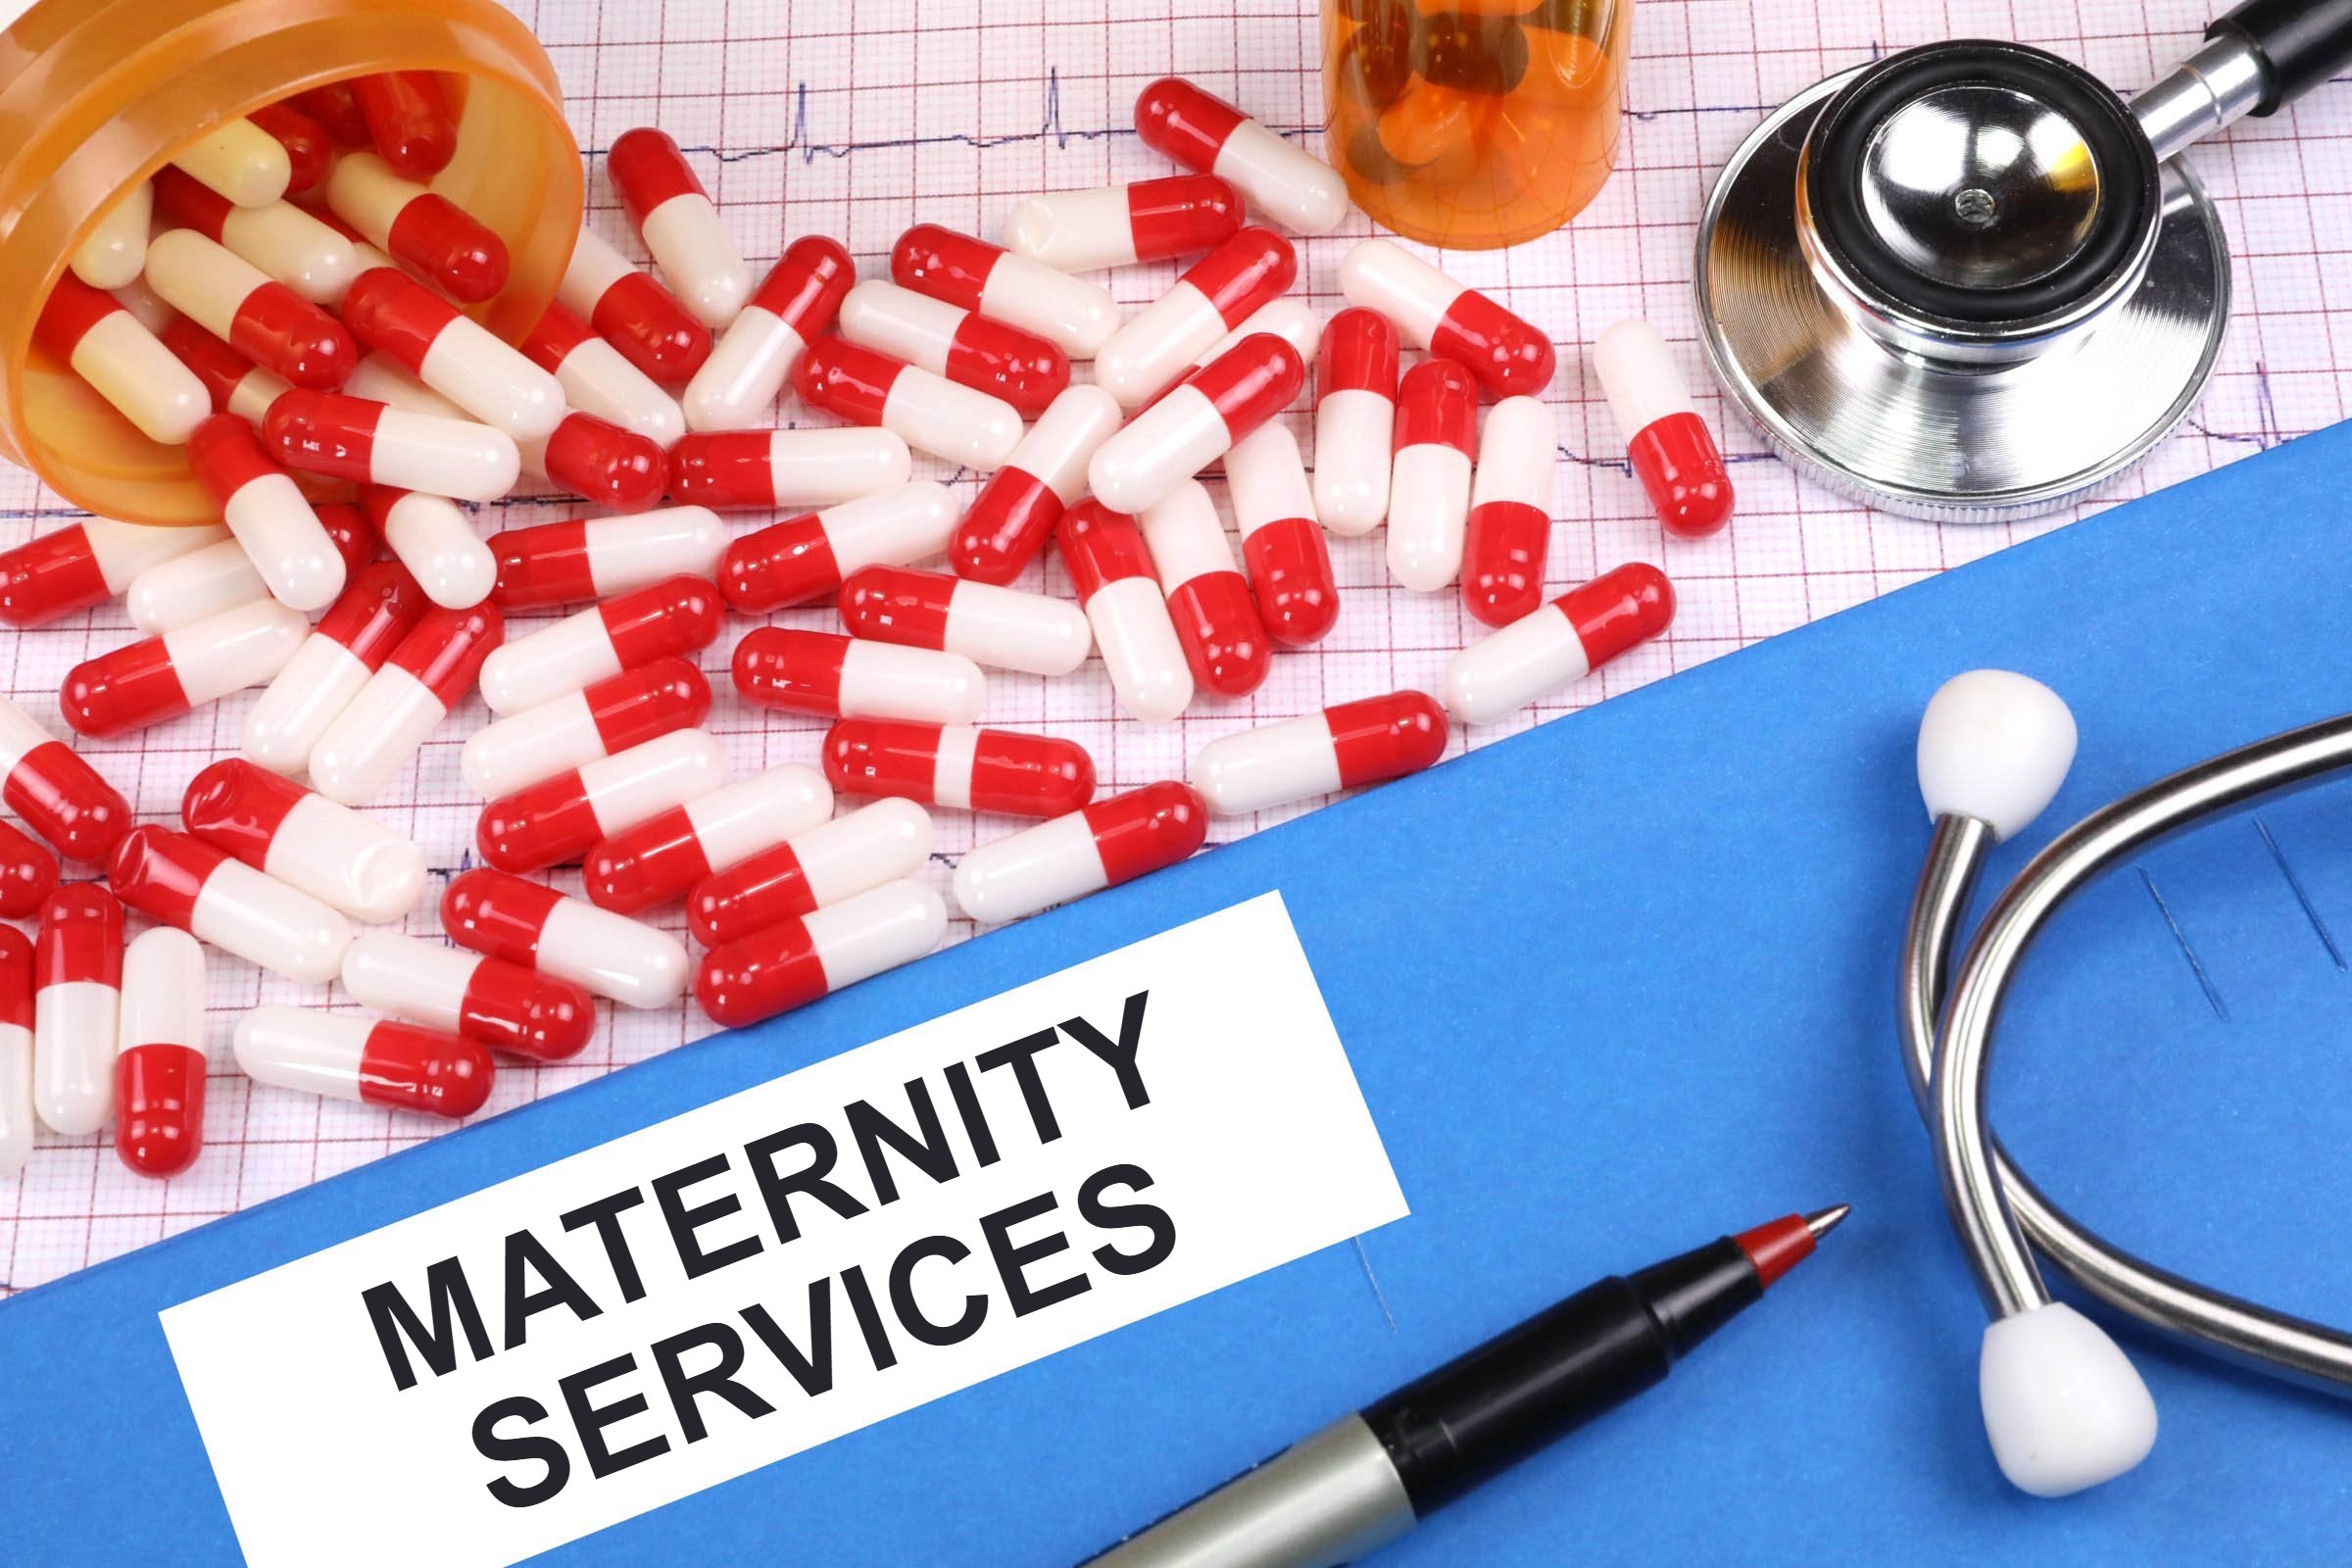 maternity services